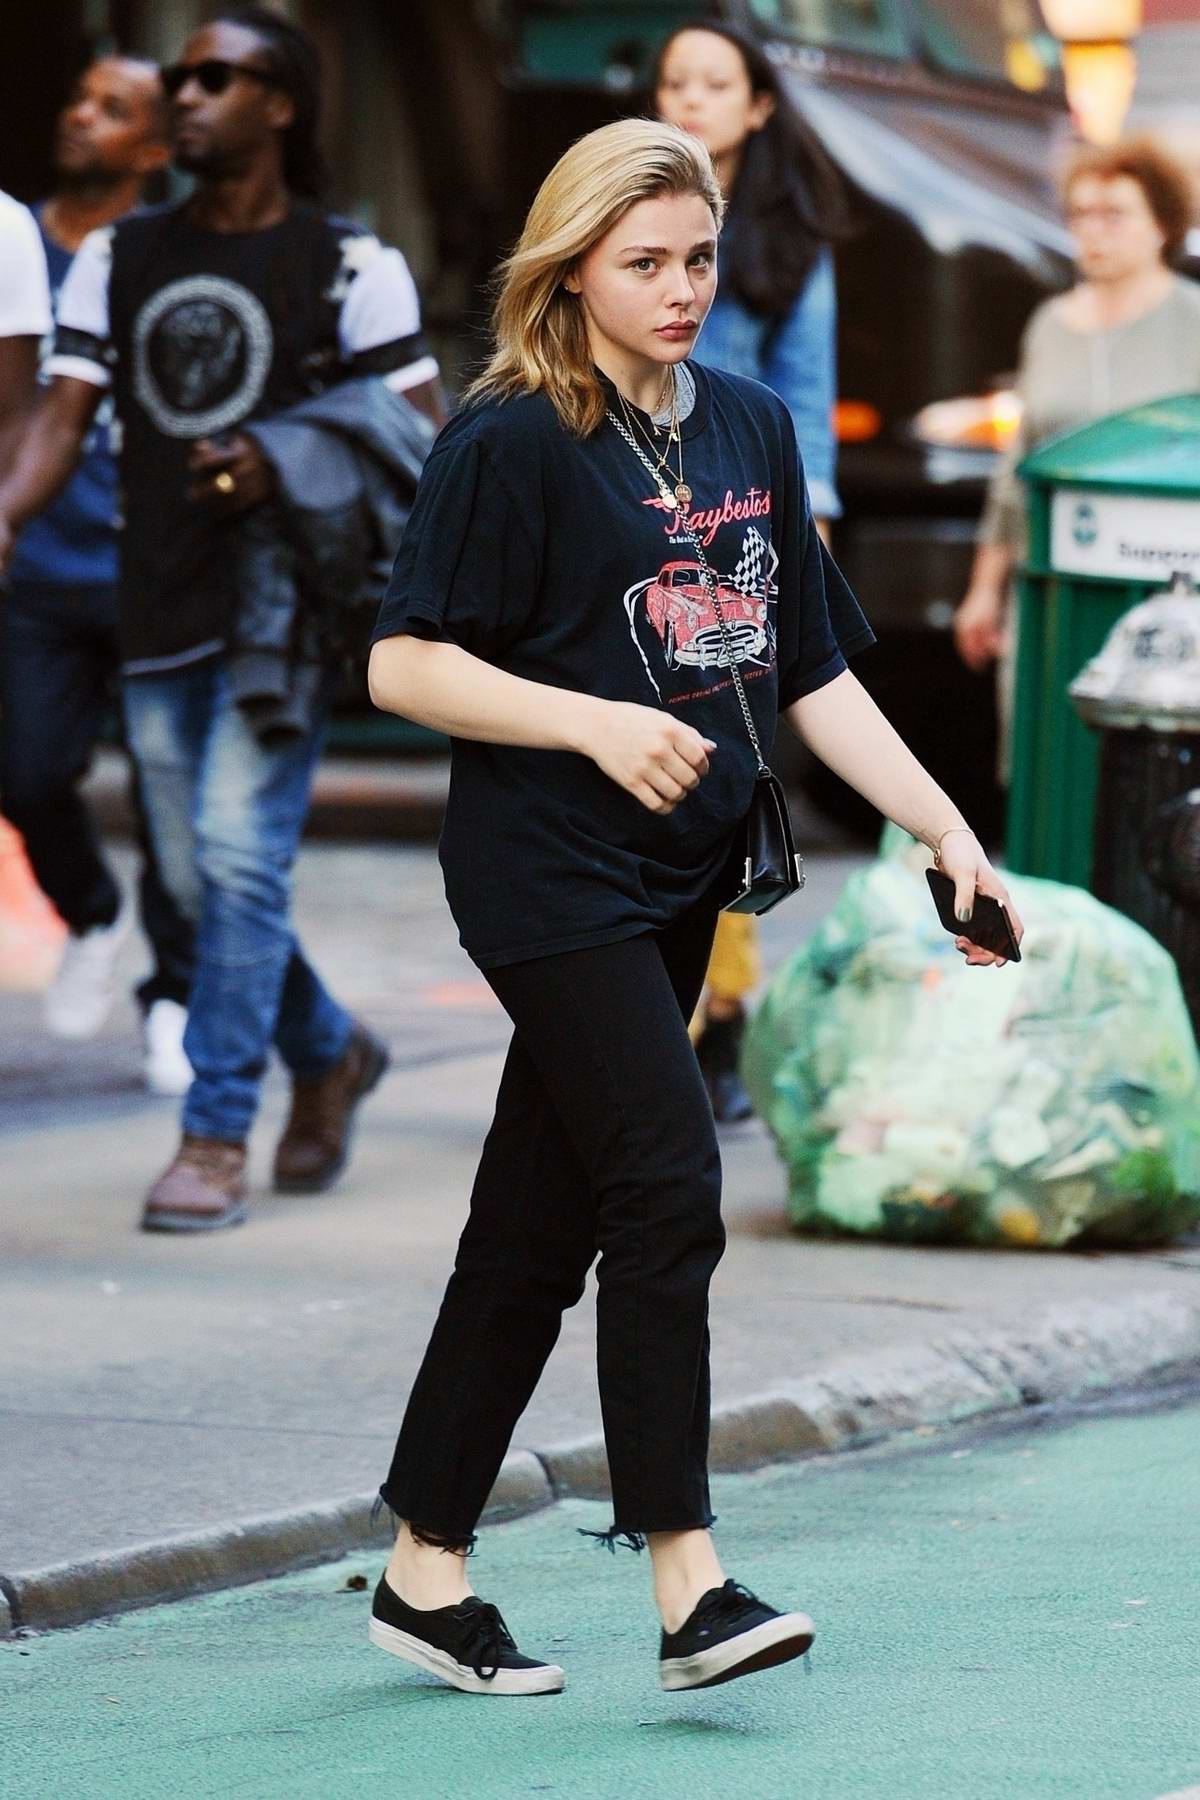 Chloe Grace Moretz opts for a casual look while out in SoHo, New York City